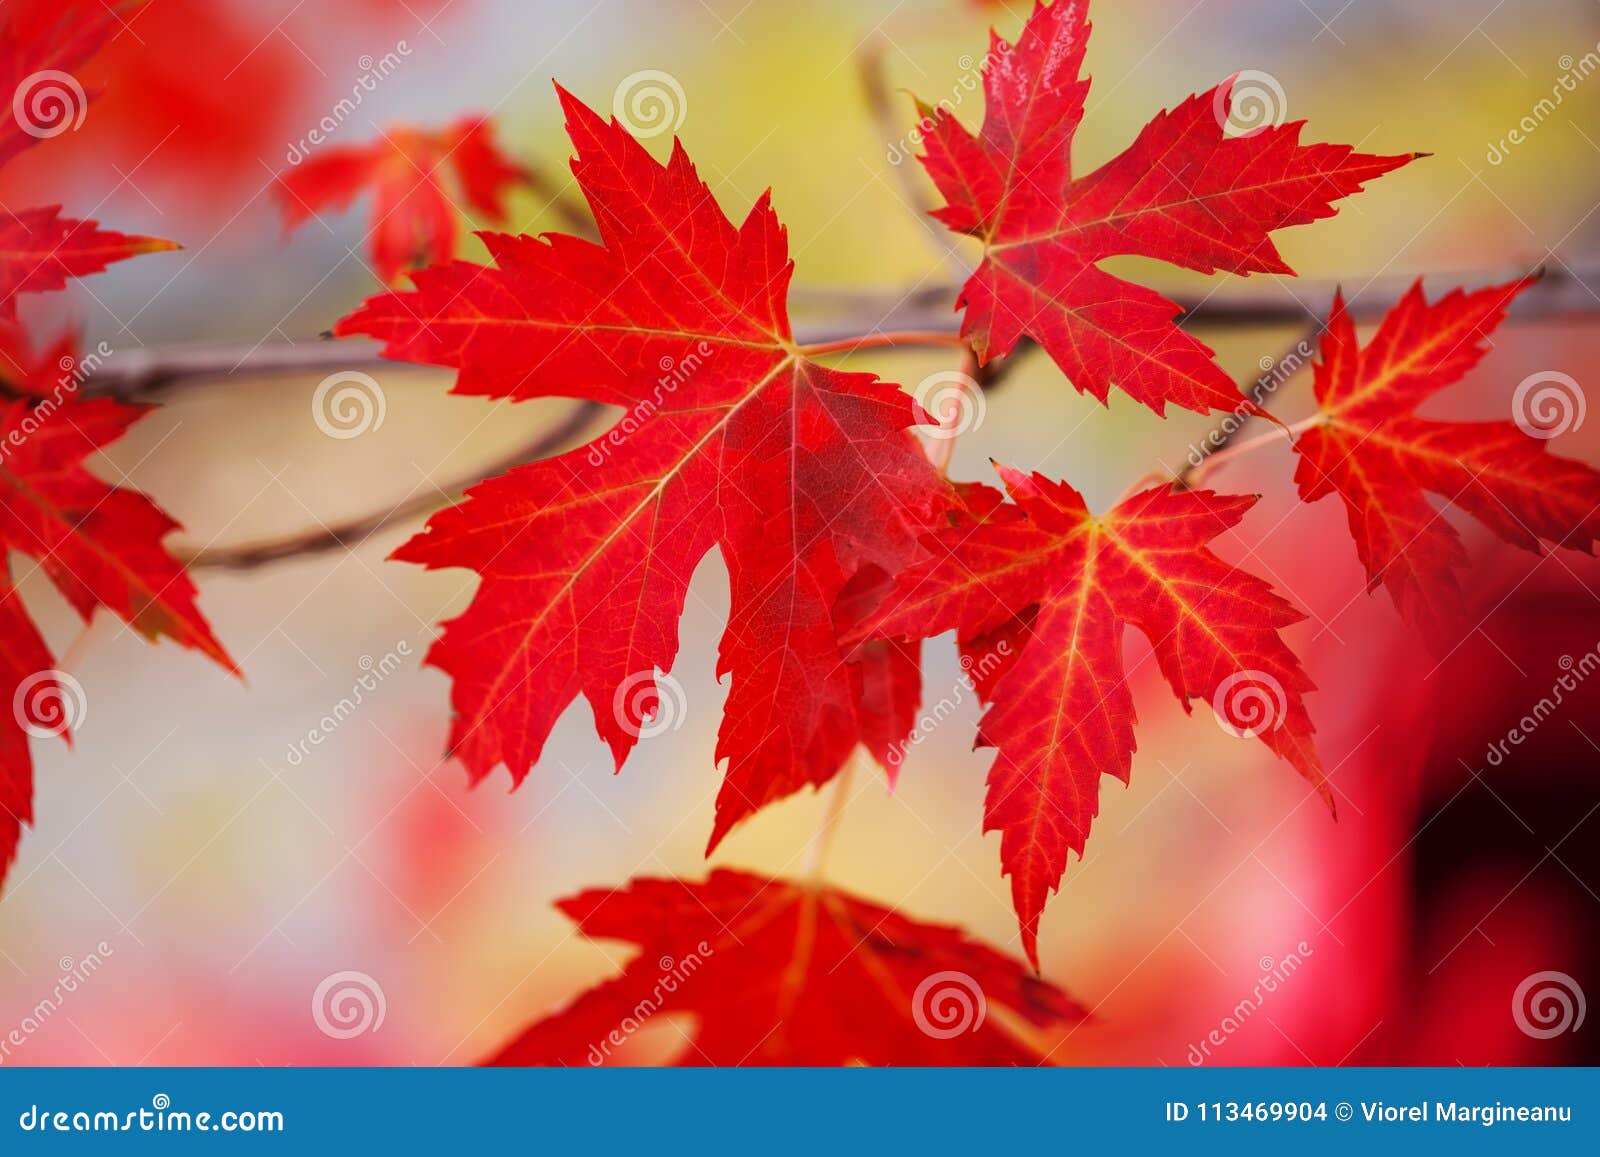 Branch with Red Maple Leaves. Canada Leaves Background Stock - Image of celebration, calgary: 113469904